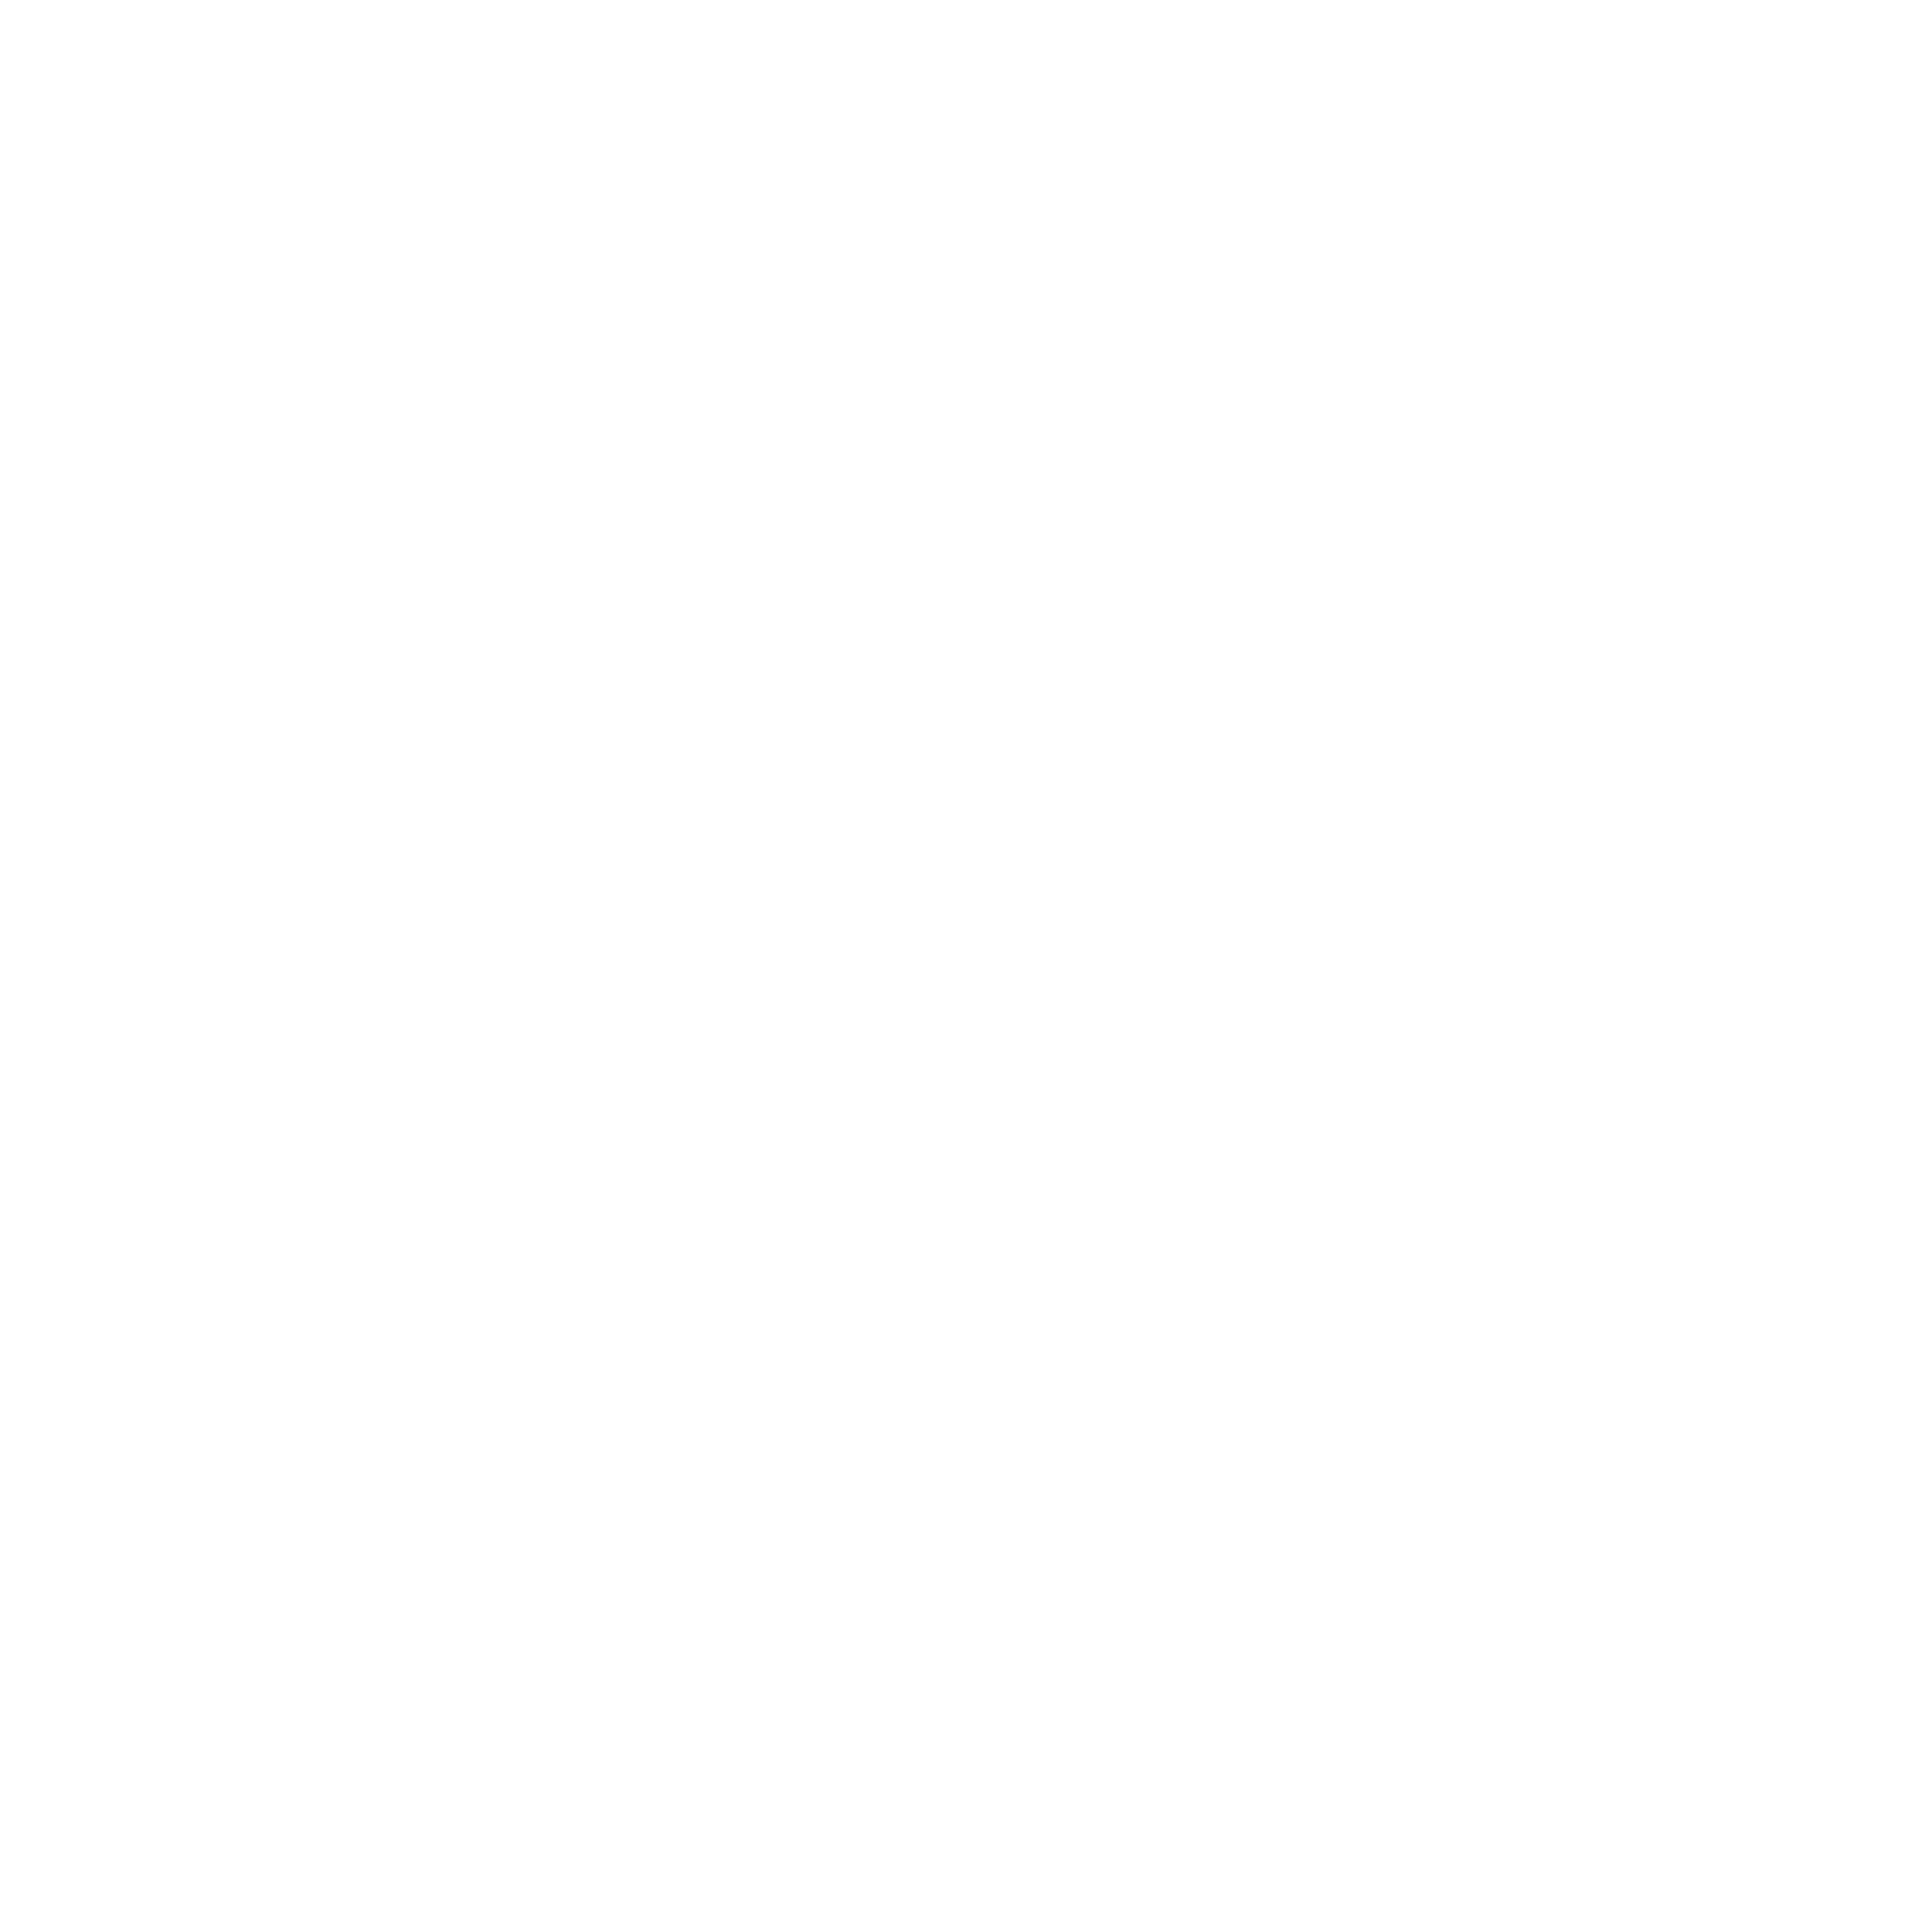 Aeternity Cryptocurrency icon